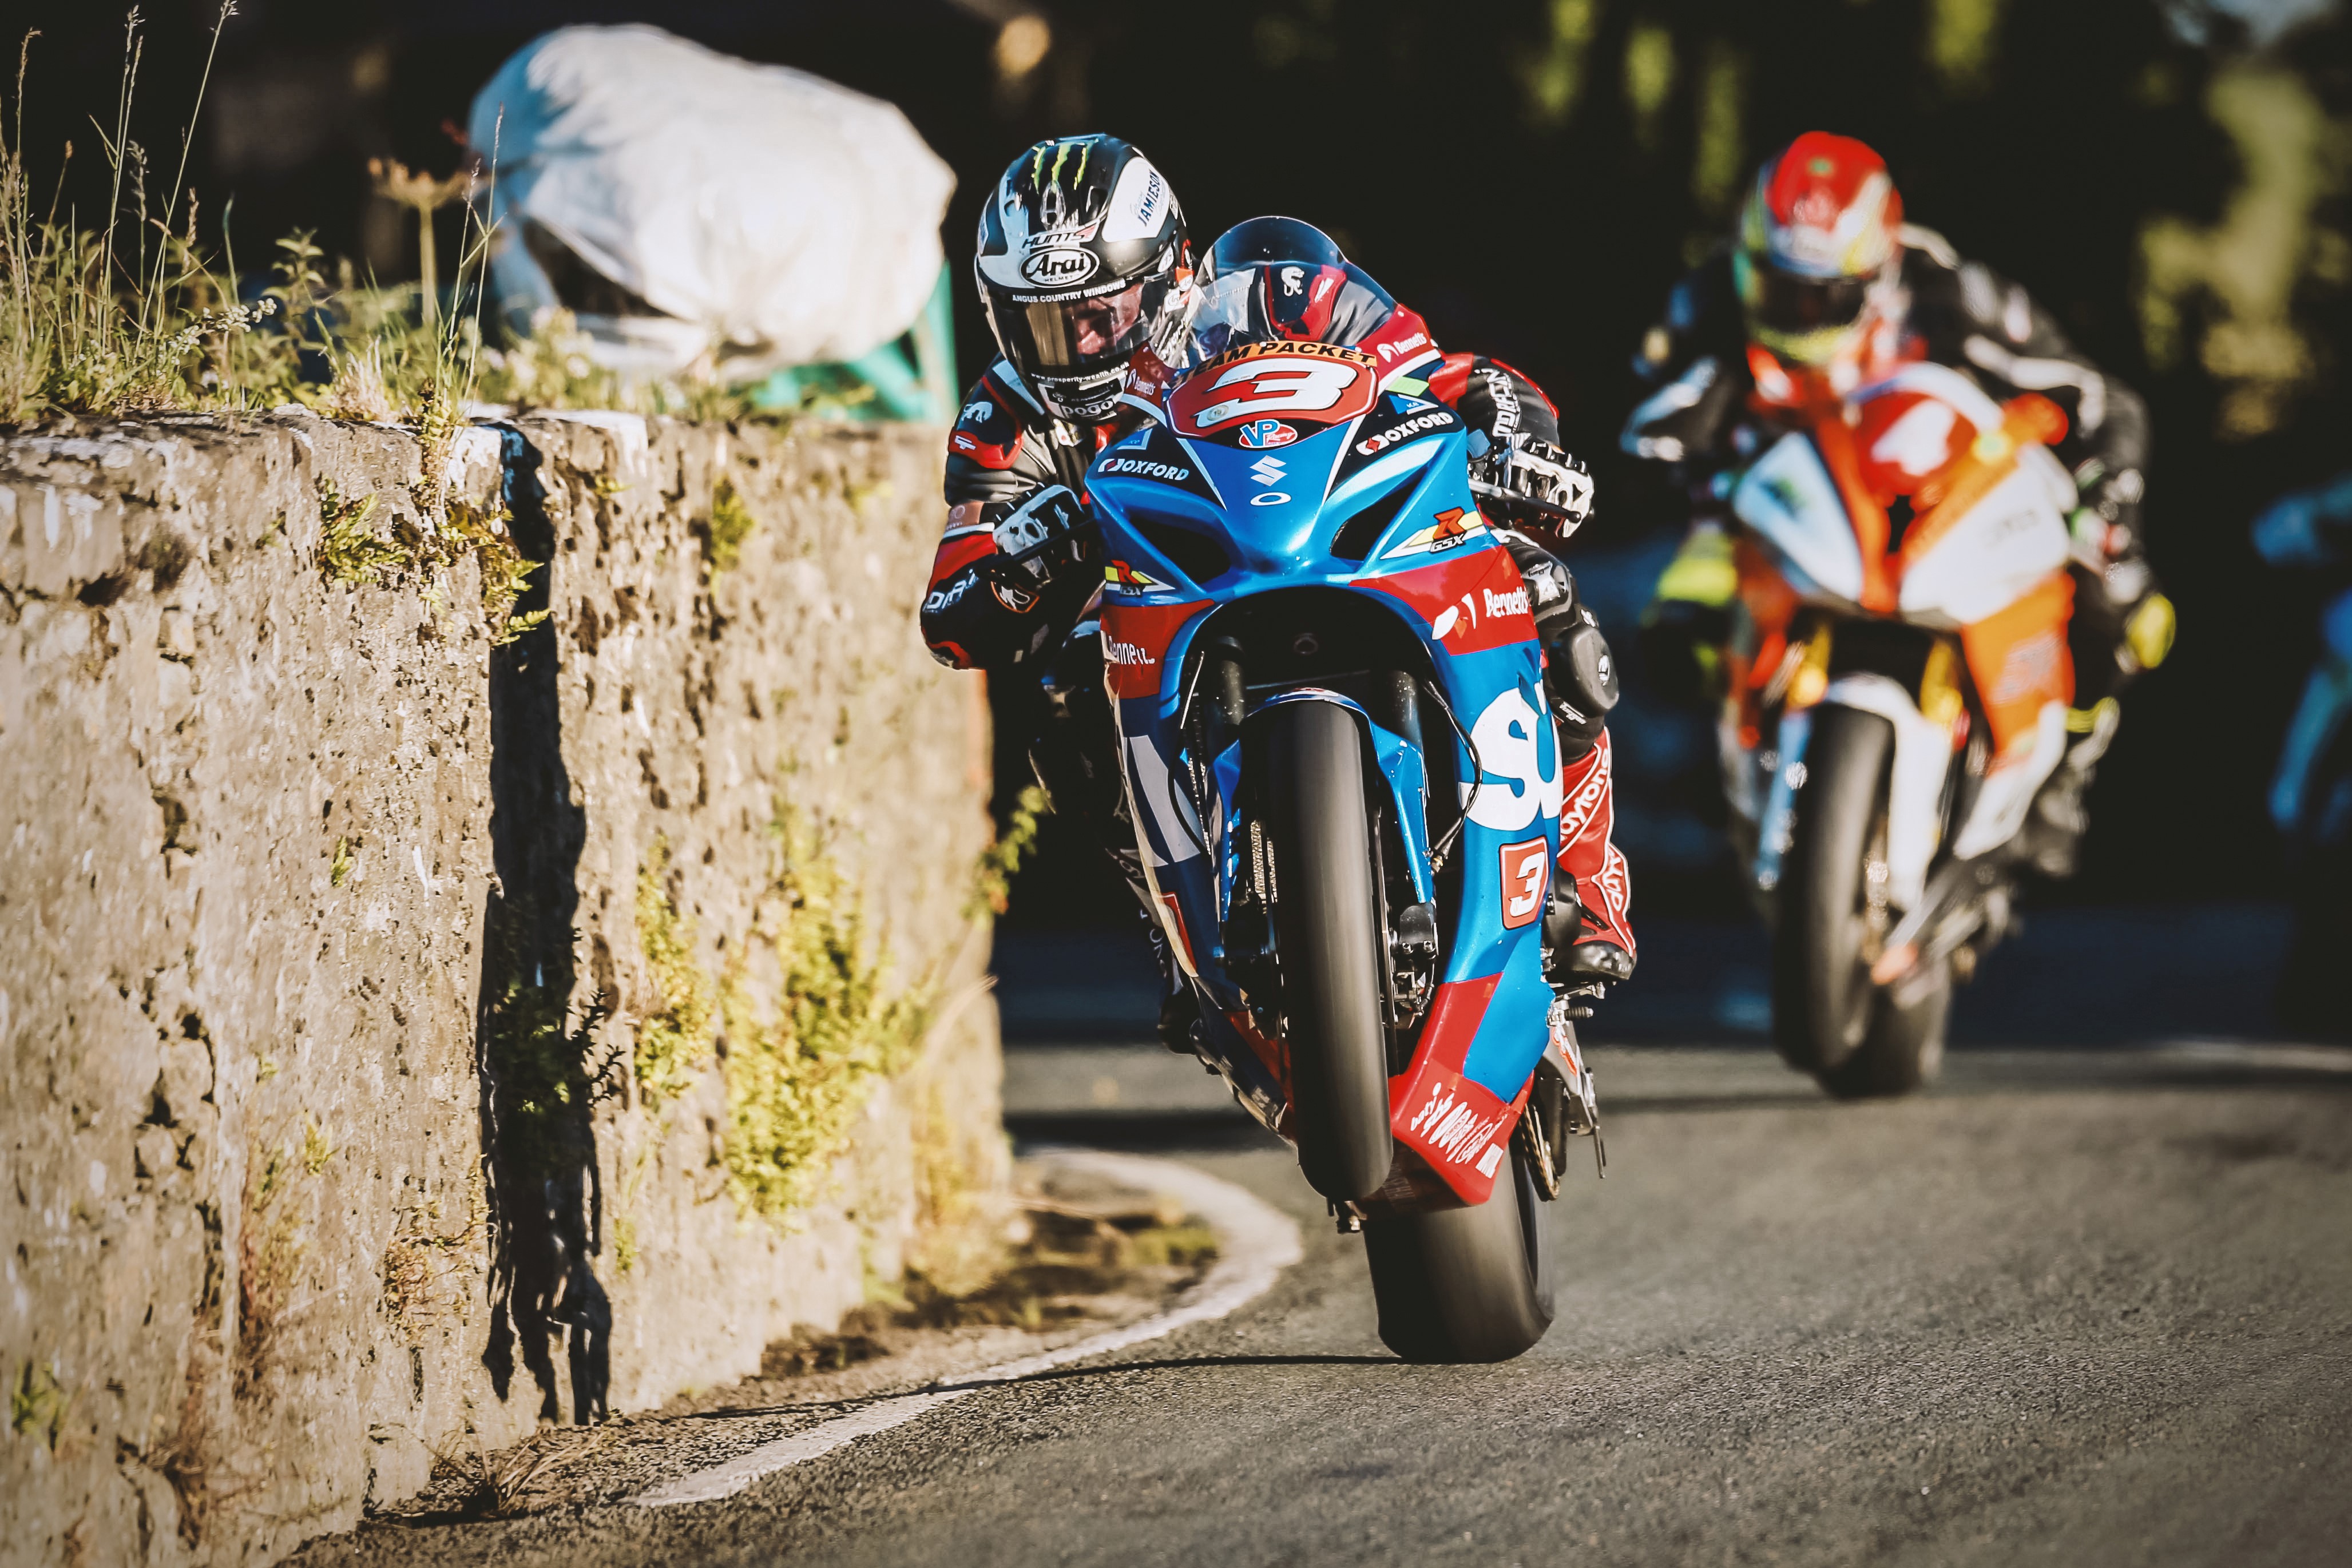 Hat-trick hero Dunlop takes three wins for Bennetts Suzuki at Southern 100 road races